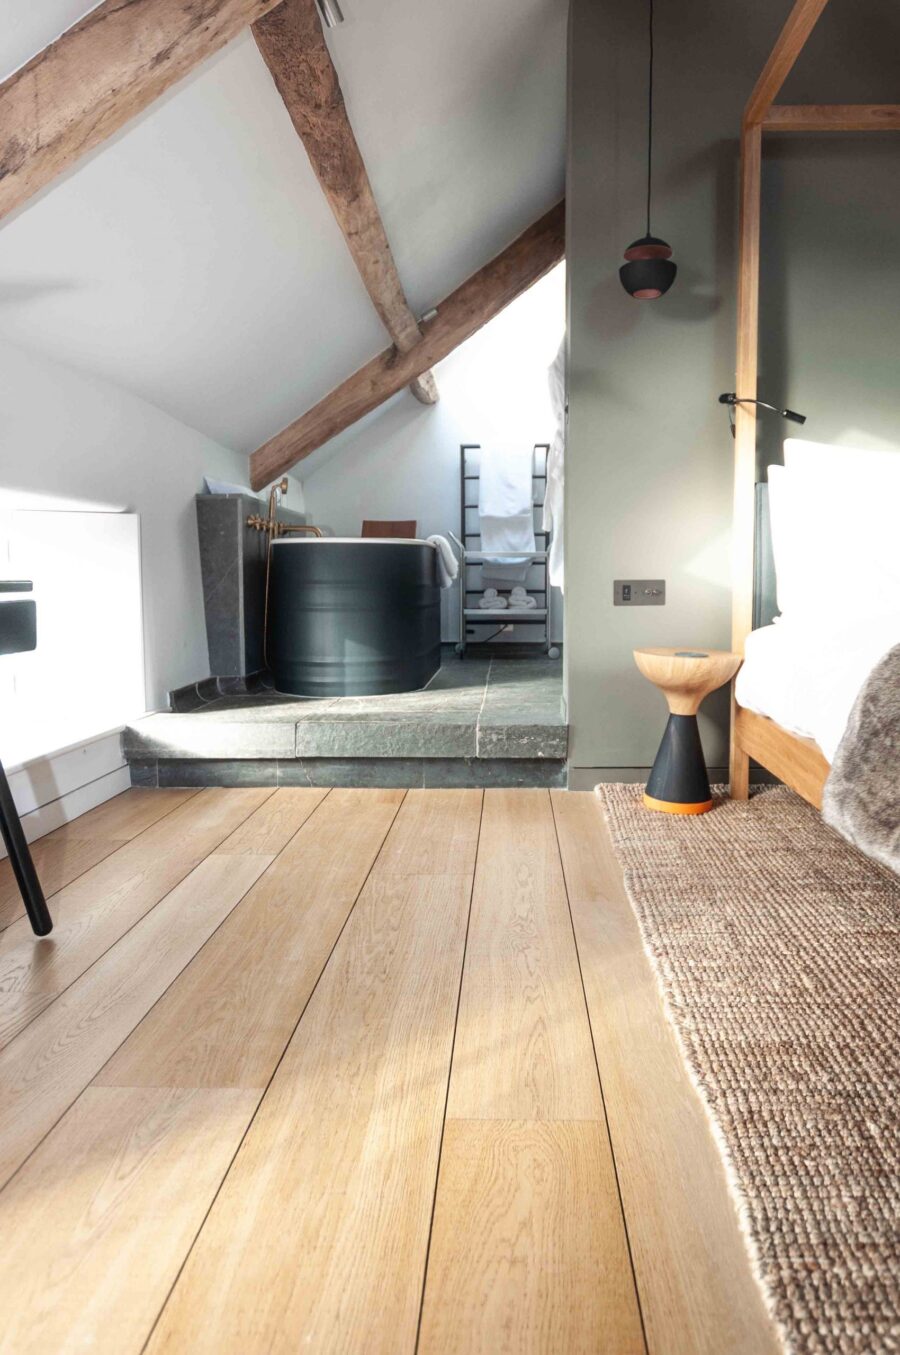 Sawn & Brushed oak flooring with invisible lacquer in converted coach house